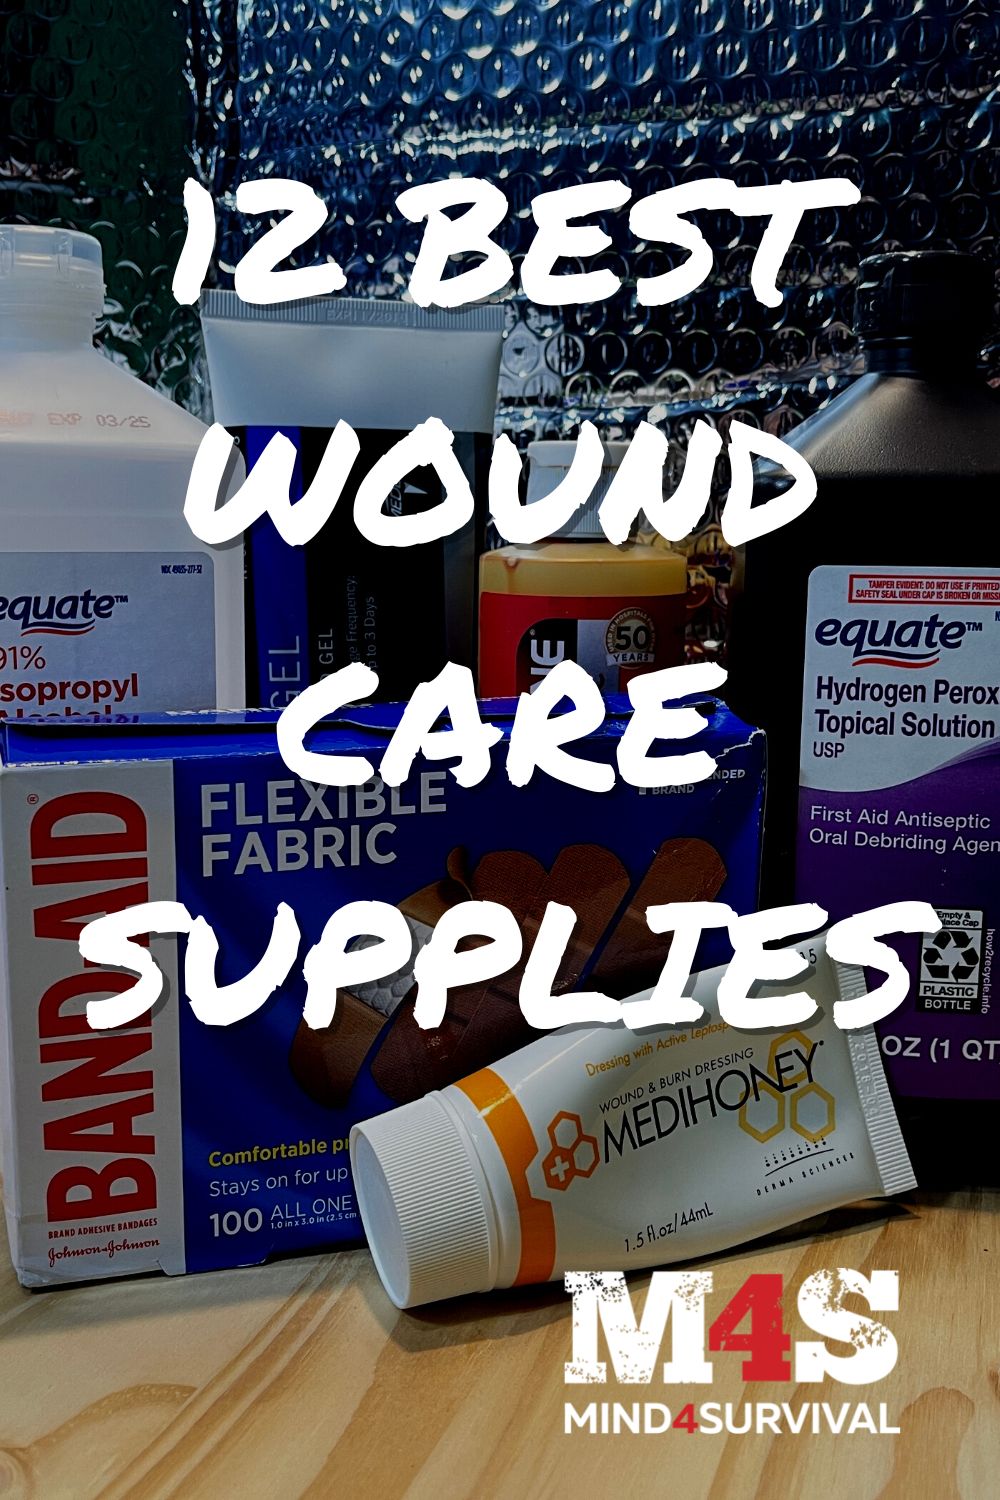 12 Best Wound Care Supplies (Survival Medical Kit)